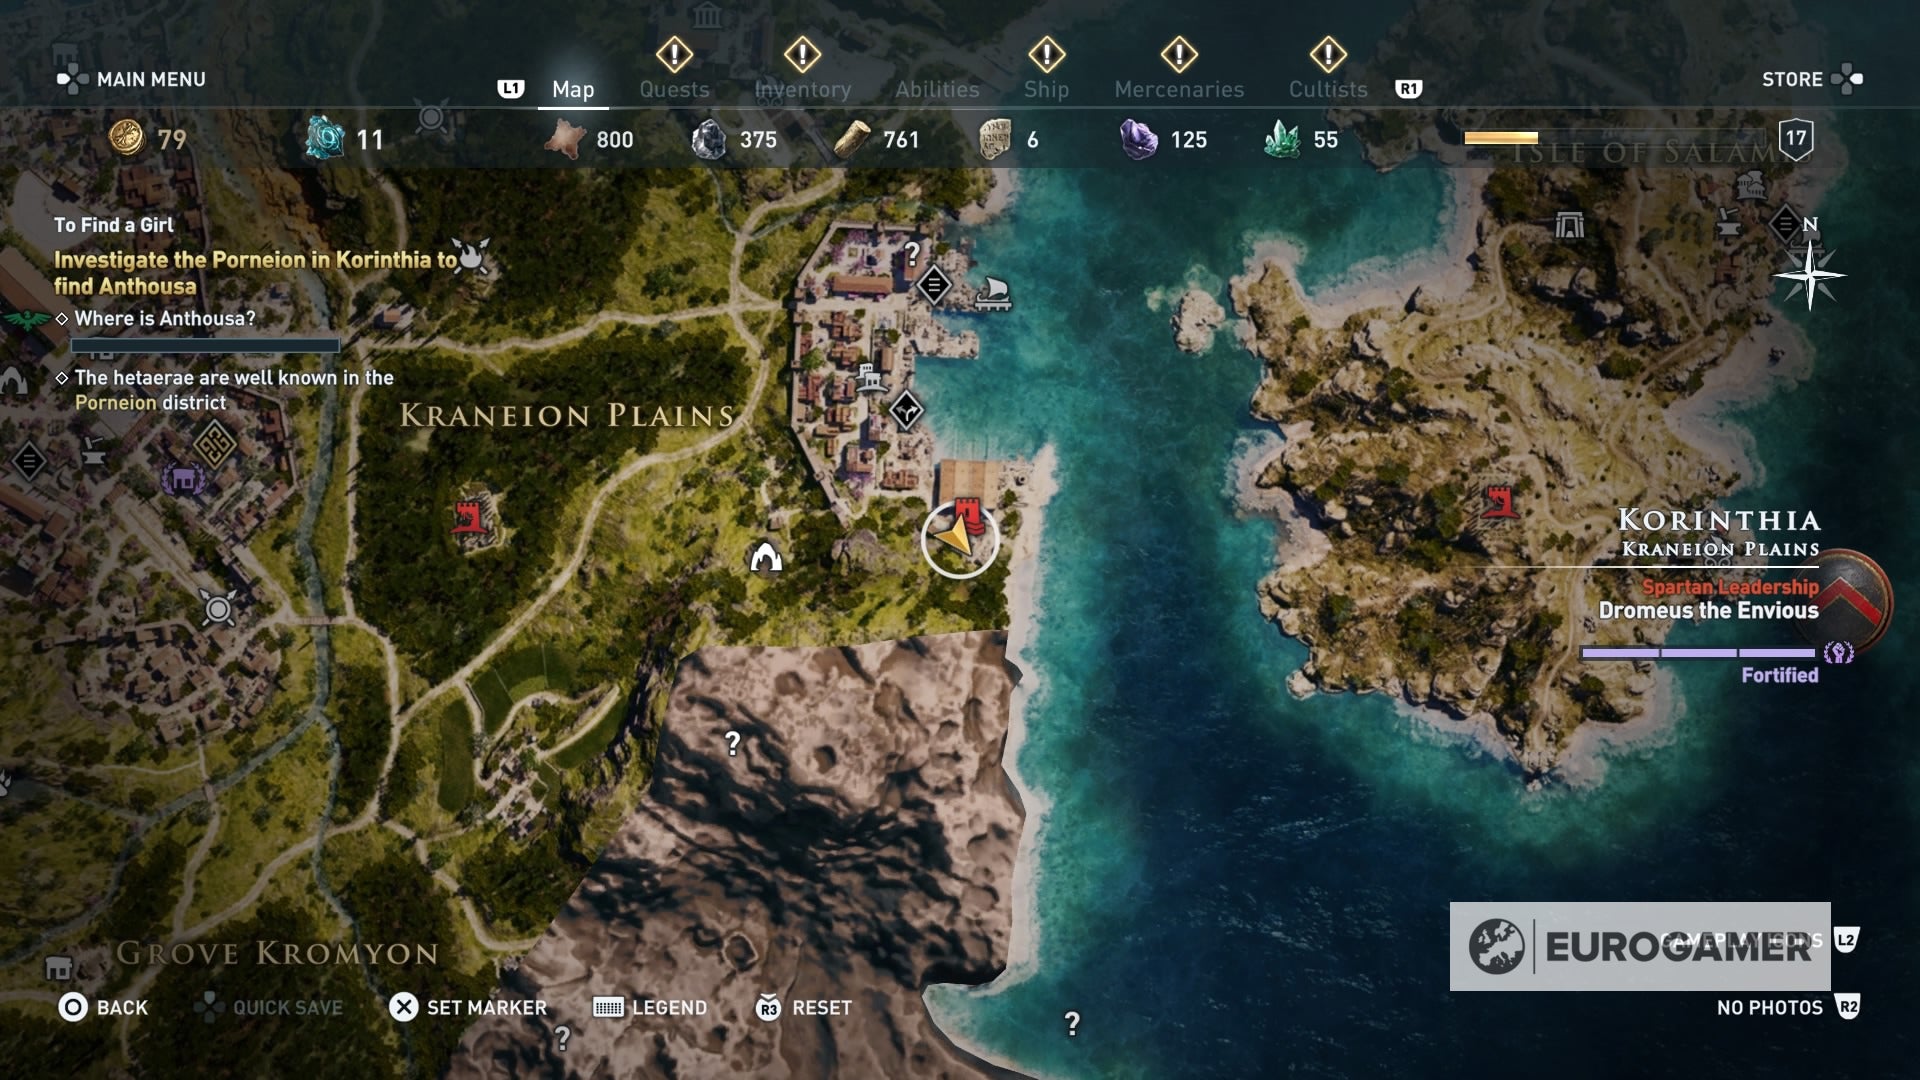 Assassin's Creed Odyssey - Turning Tides, An Arm and a Leg riddle solutions and where to find the Sea Captain Dock, Argos Leader's tablets | Eurogamer.net